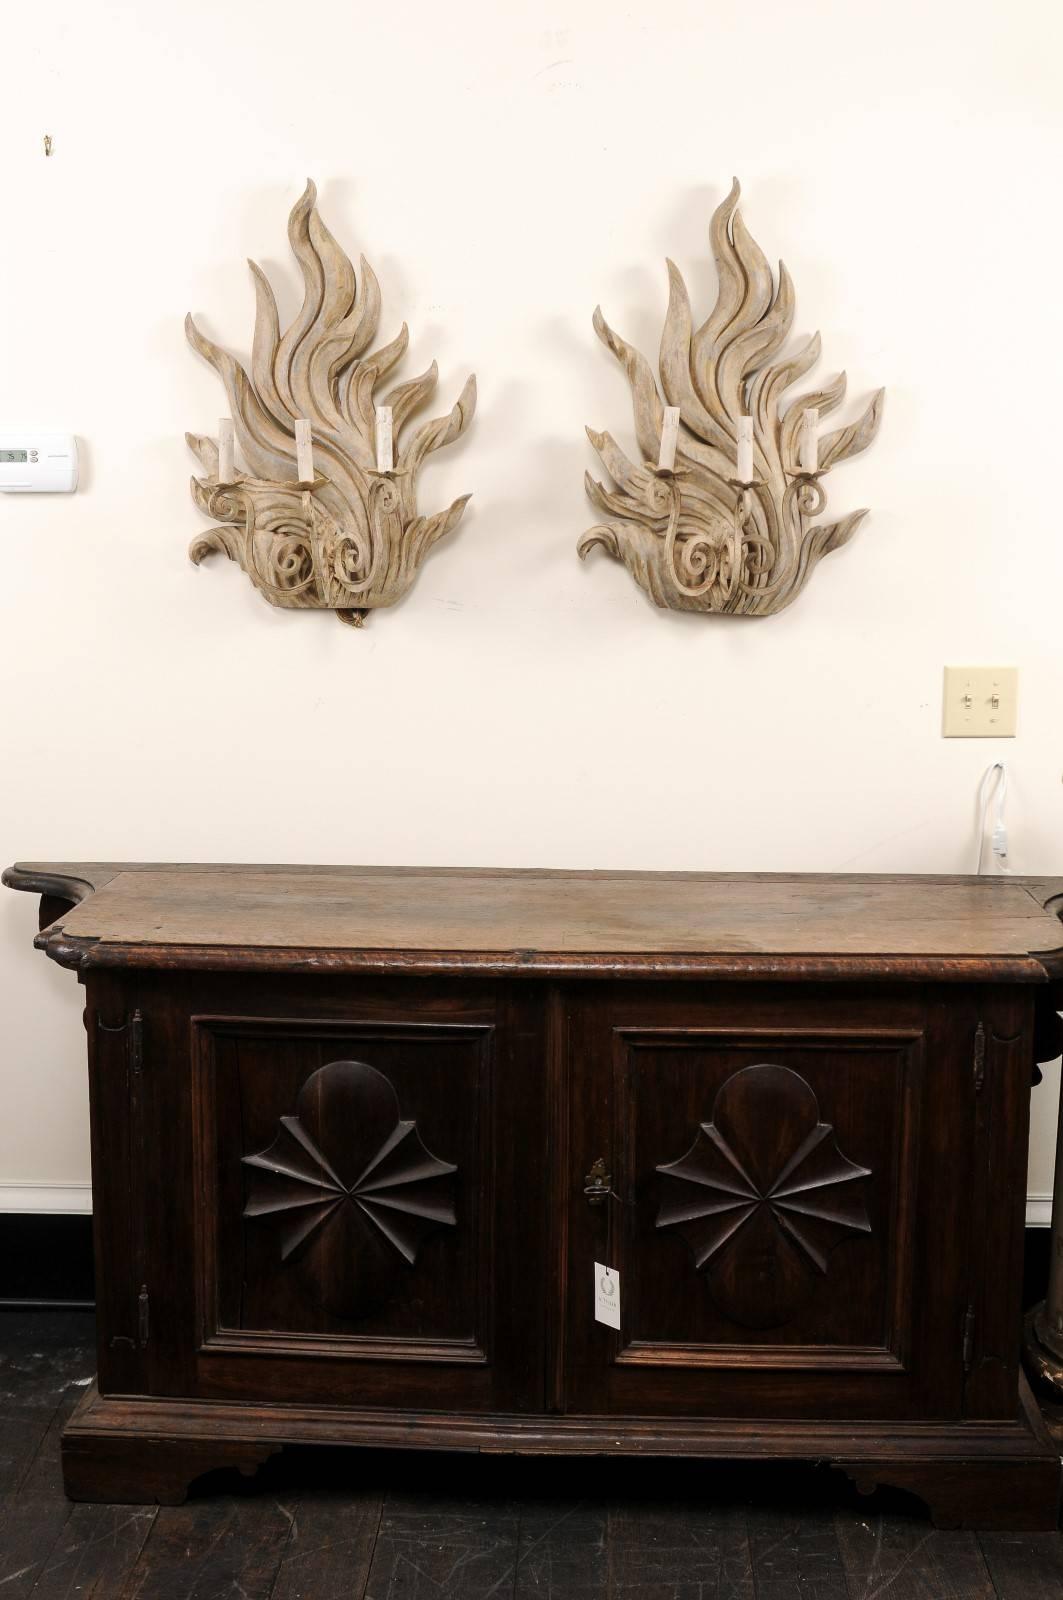 Pair of Vintage Custom Flame Three-Light Wood Sconces with Scrolled Metal Arms For Sale 4